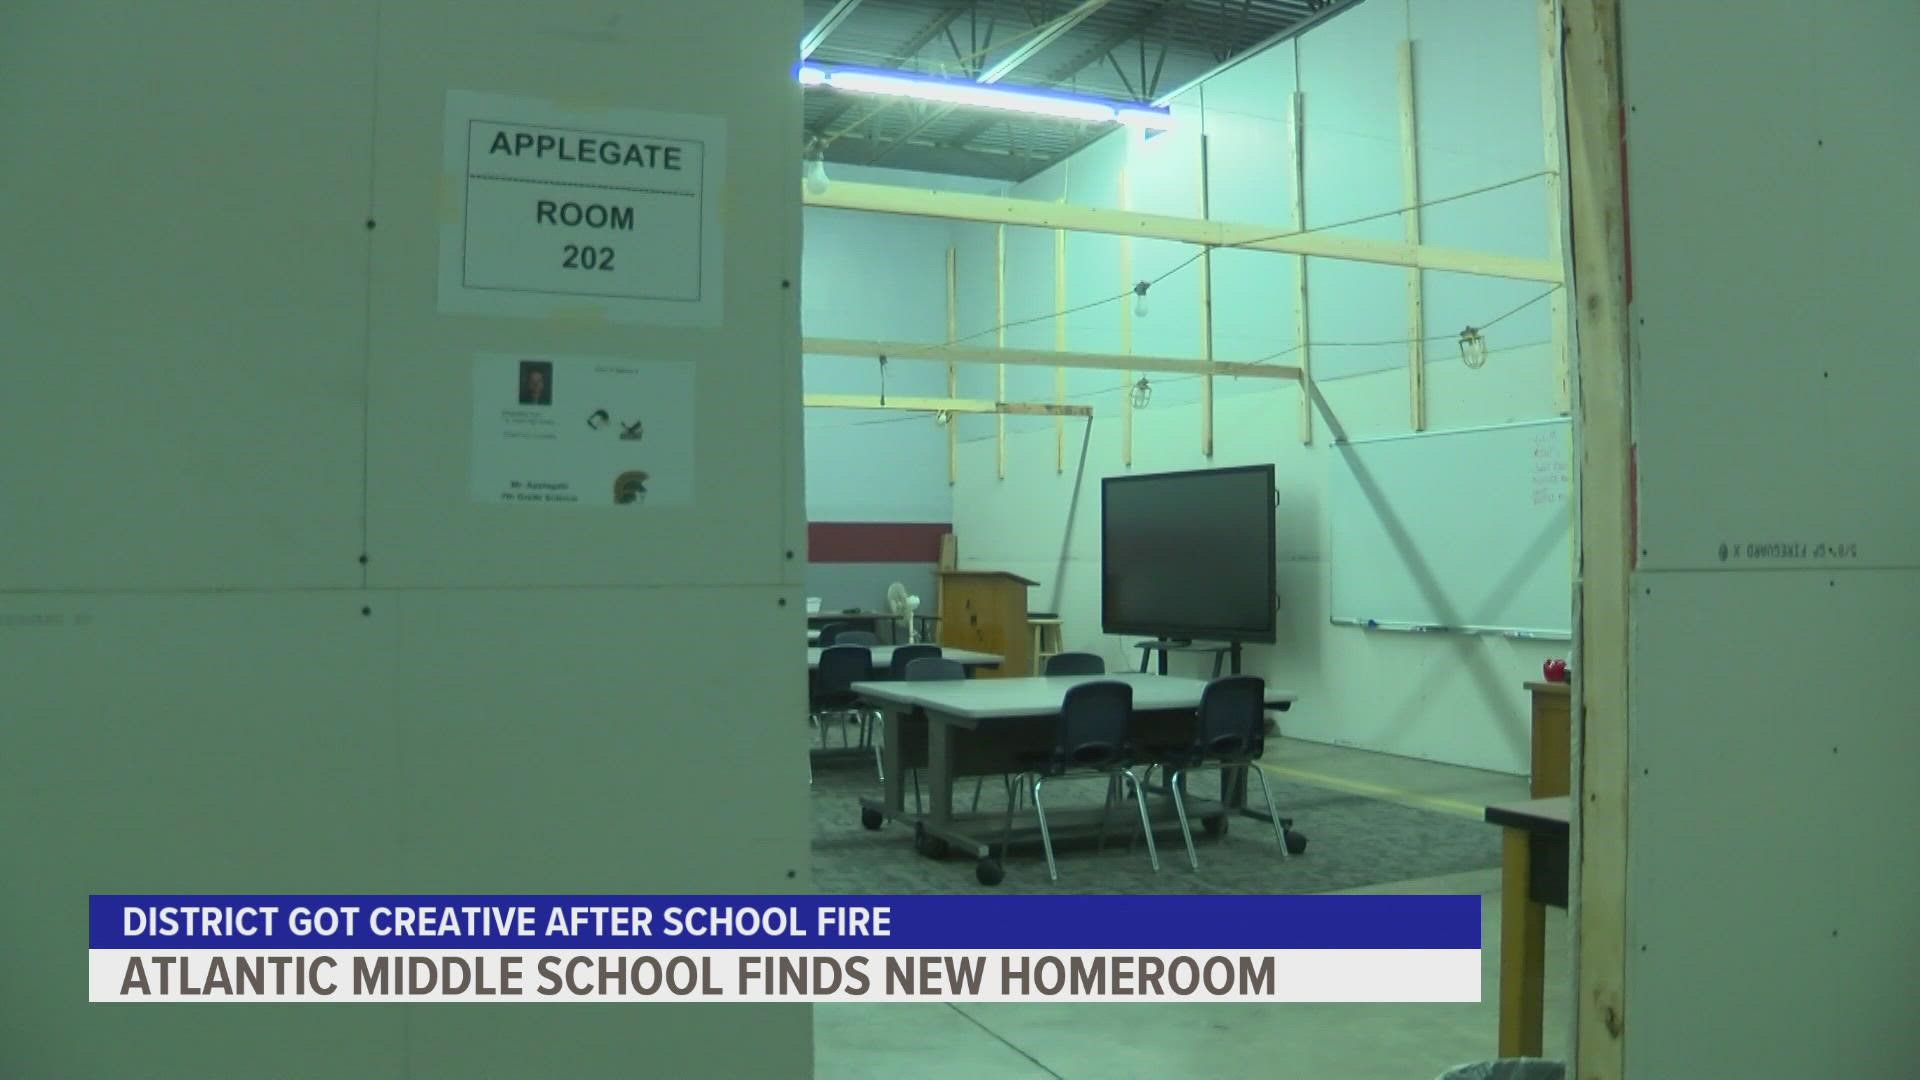 Because of a fire that damaged the middle school in July, the district had to get creative with its plans for where to house all the students.